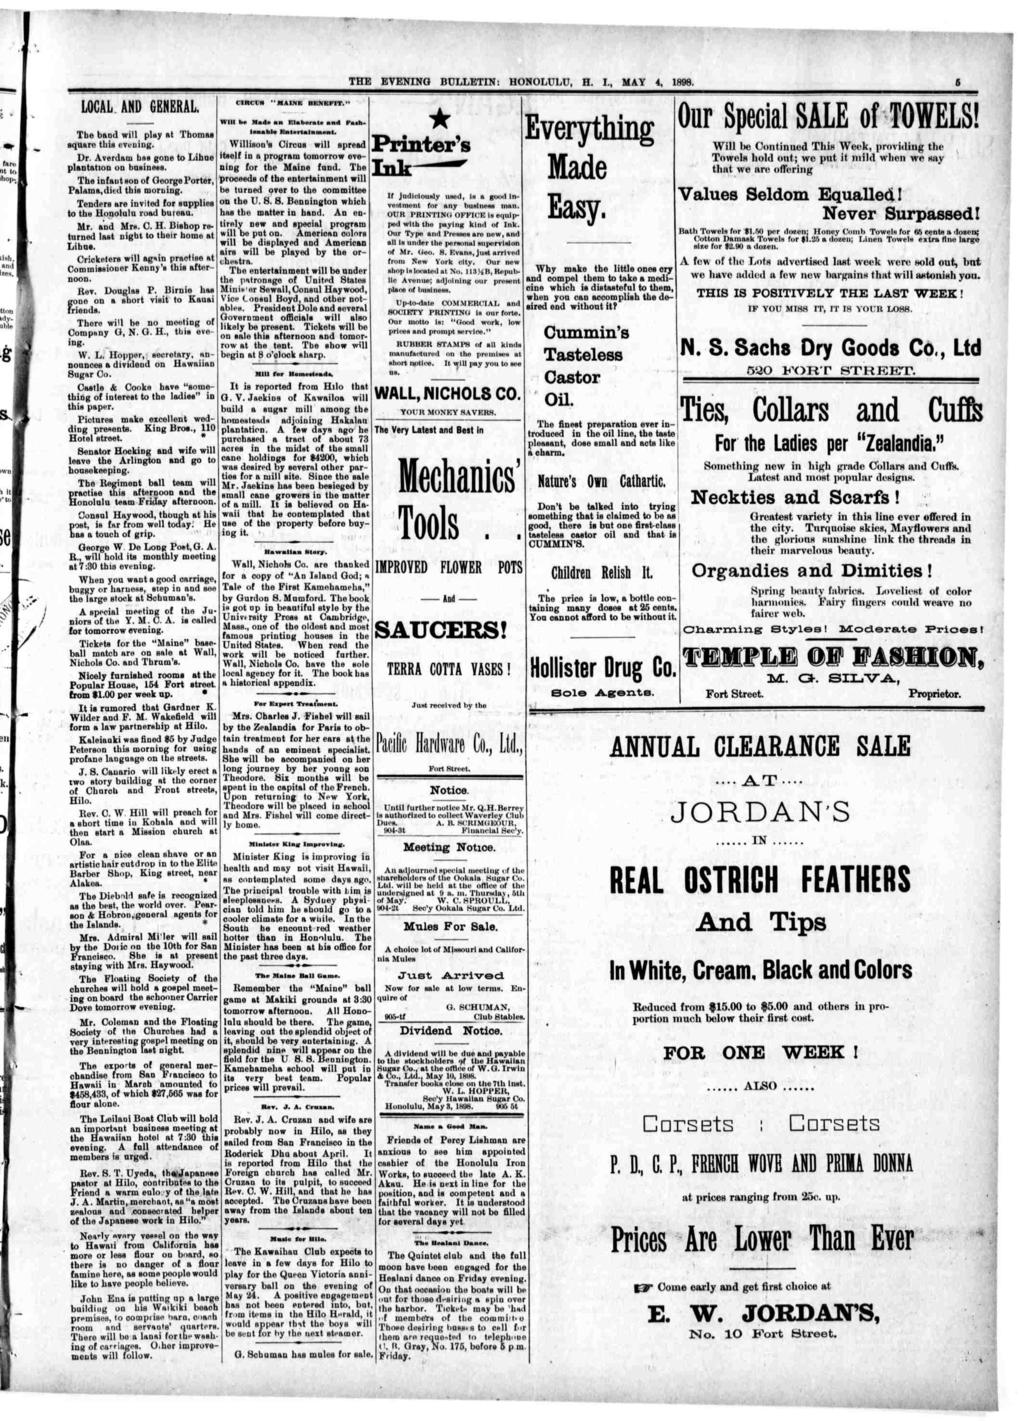 THE EVENNG BULLETN: HONOLULU, H, MAY 4, 1898 J LOCAL AND GENERAL Tbo band wll, play a Thomas squaro hs evenng Dr Averdam una gone o Lhno planaon on busness The nfauson George Porer, Palama,ded hs